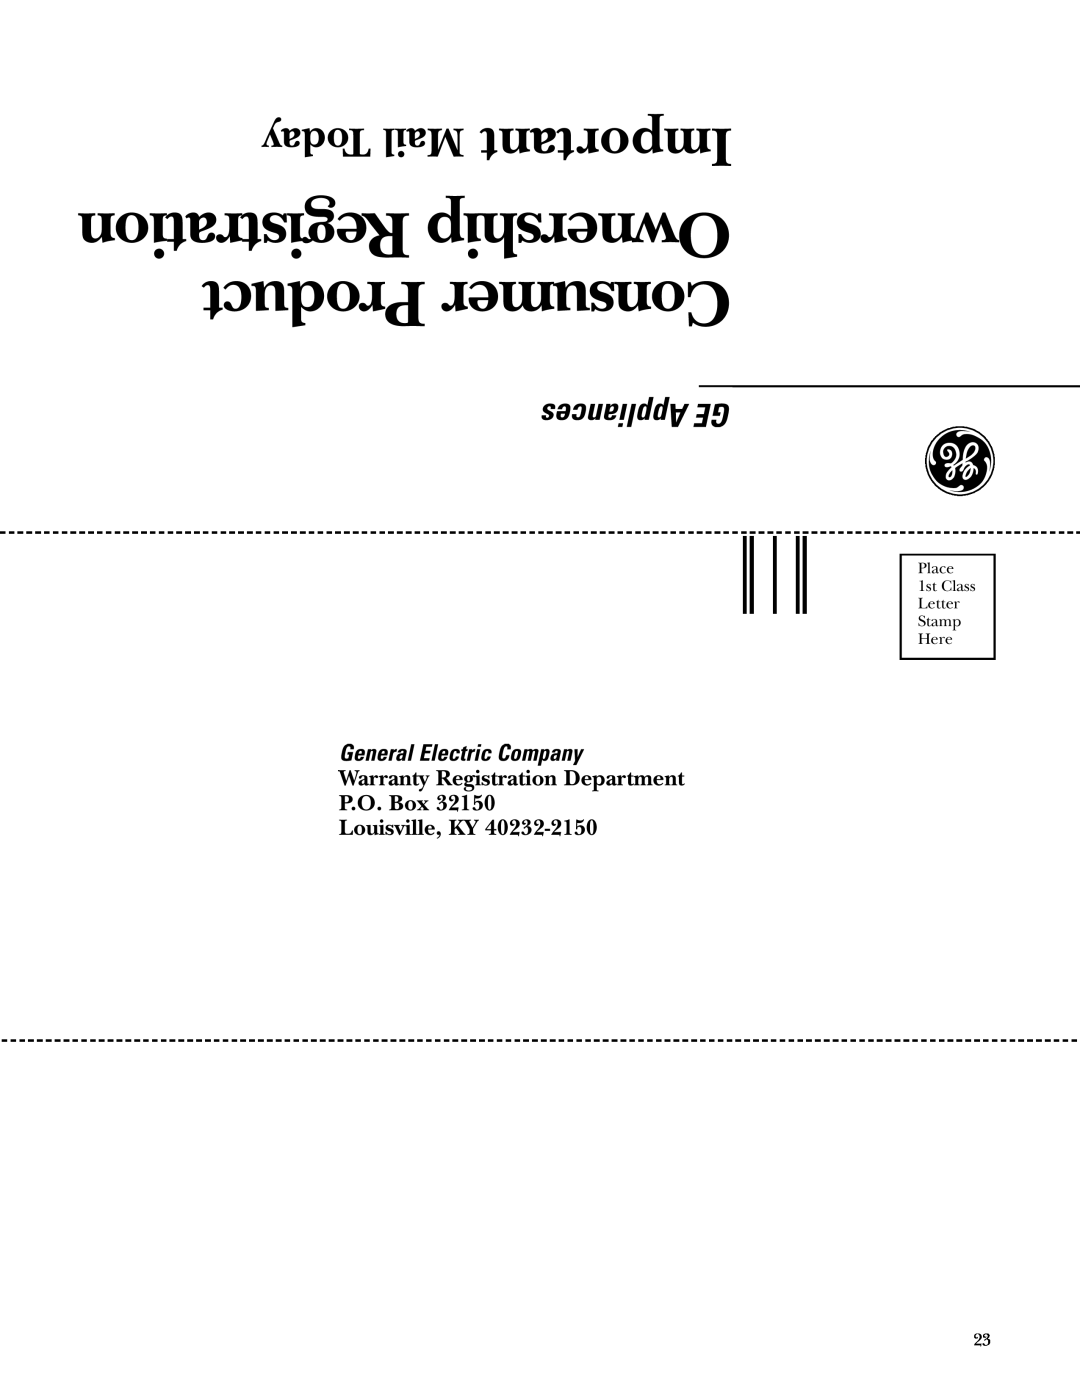 GE 36 owner manual Today Mail Important, Registration Ownership Product Consumer, Appliances GE, General Electric Company 